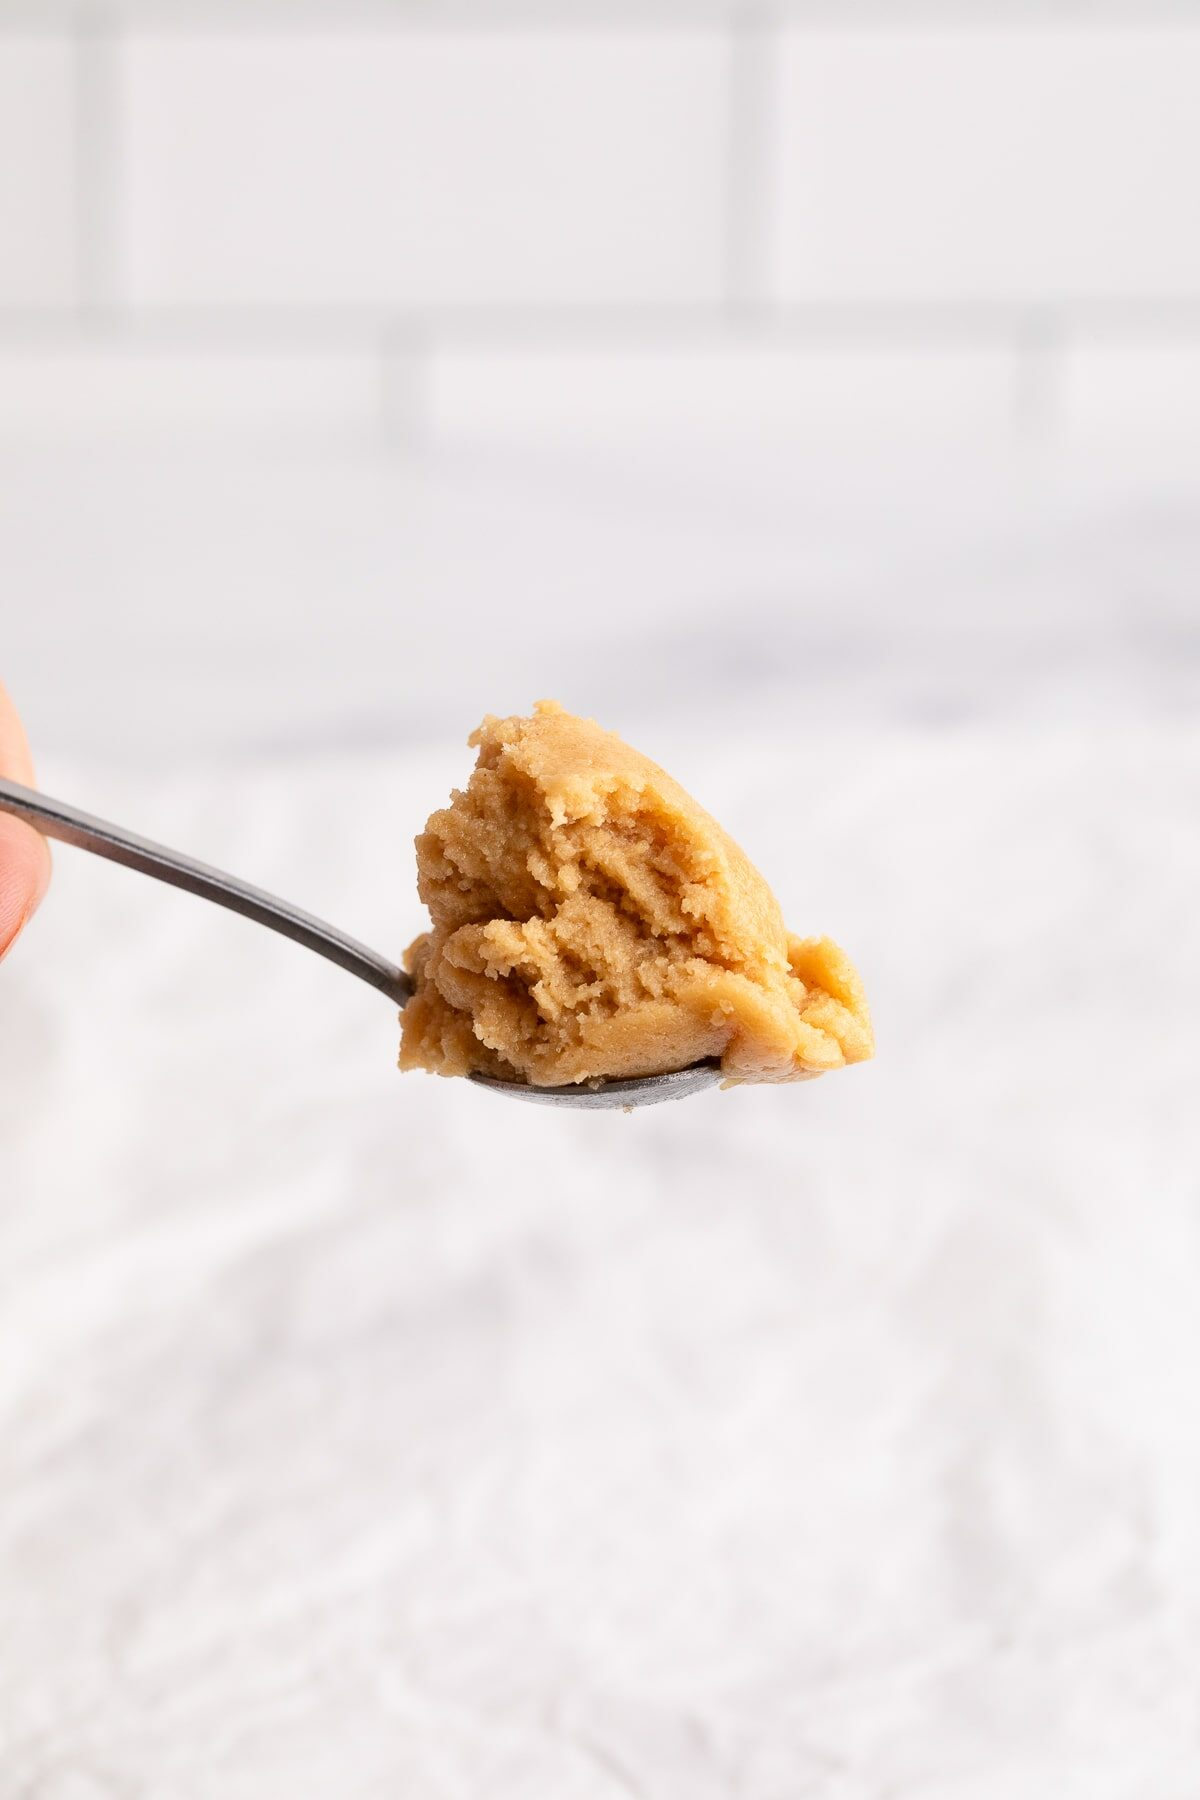 edible peanut butter cookie dough on spoon.